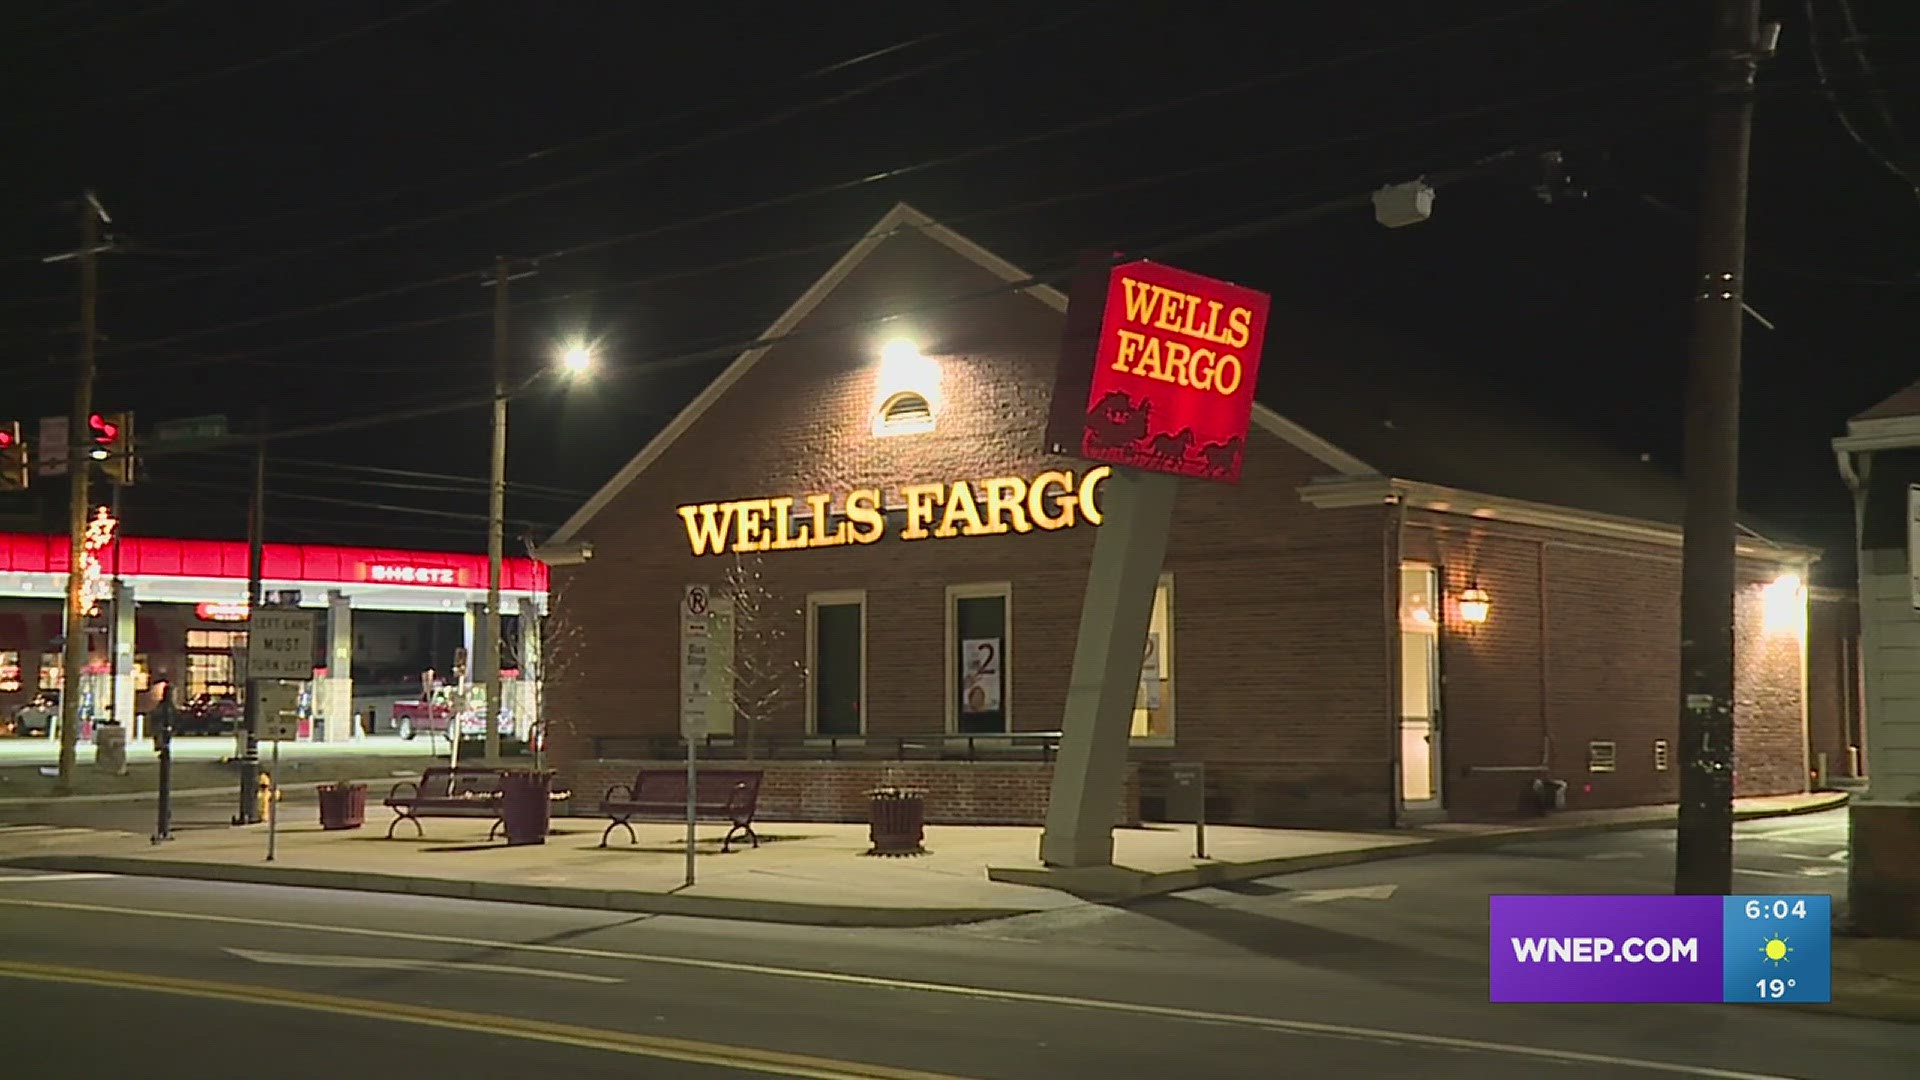 The Wells Fargo bank sign was leaning after the strong winds overnight in the Borough of Taylor in Lackawanna County.